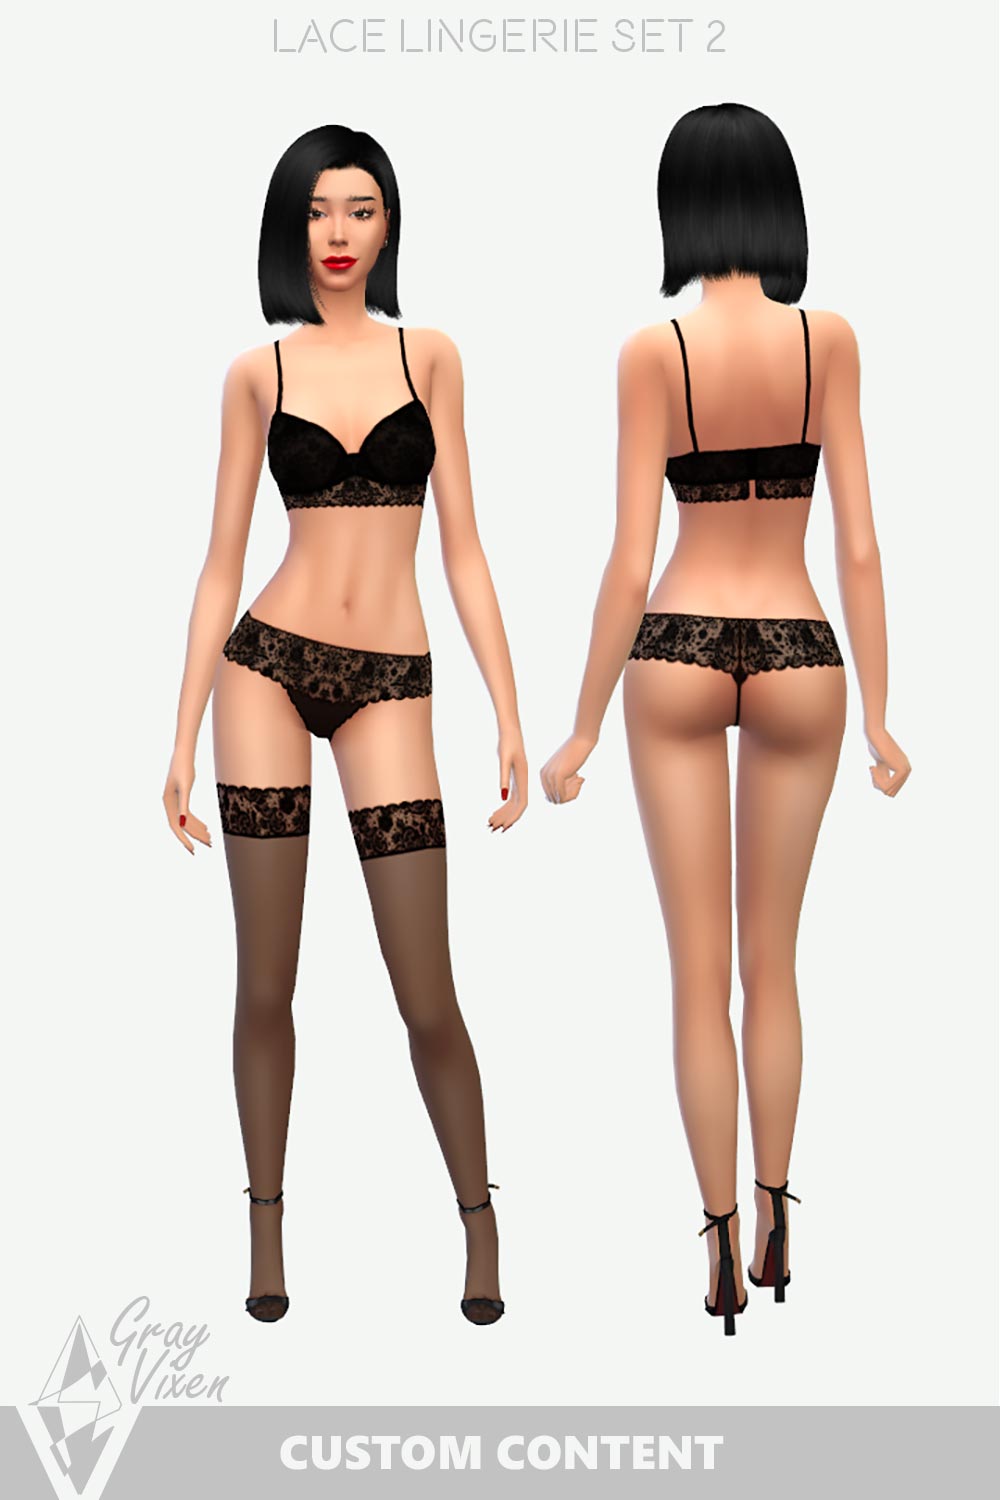 The sims 4 cc bra, Thong & V-String Panties and Hold-up Stockings